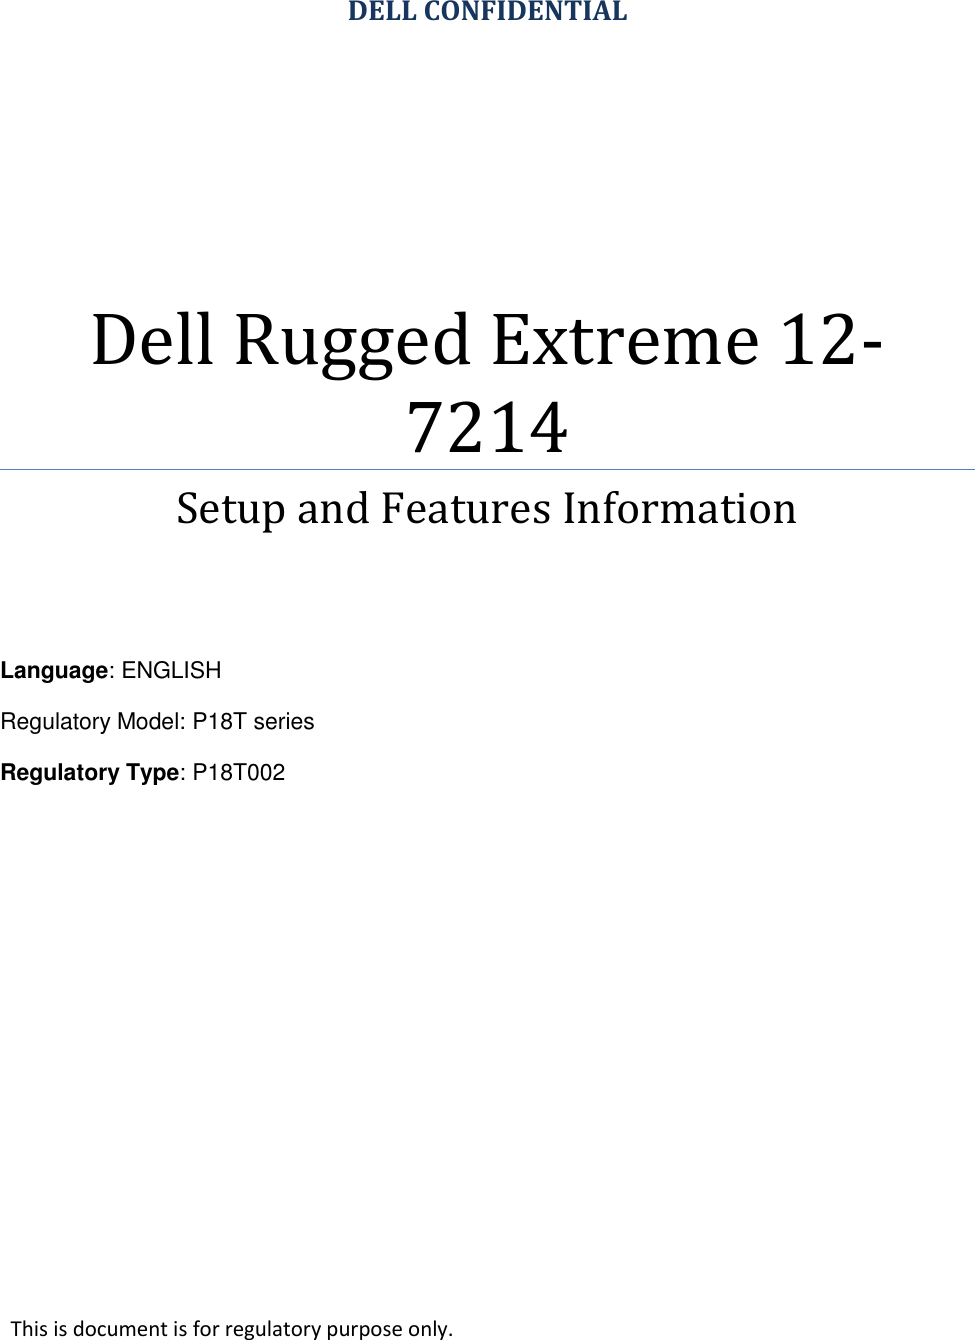    DELL CONFIDENTIAL Dell Rugged Extreme 12-7214 Setup and Features Information    Language: ENGLISH Regulatory Model: P18T series Regulatory Type: P18T002      This is document is for regulatory purpose only. 